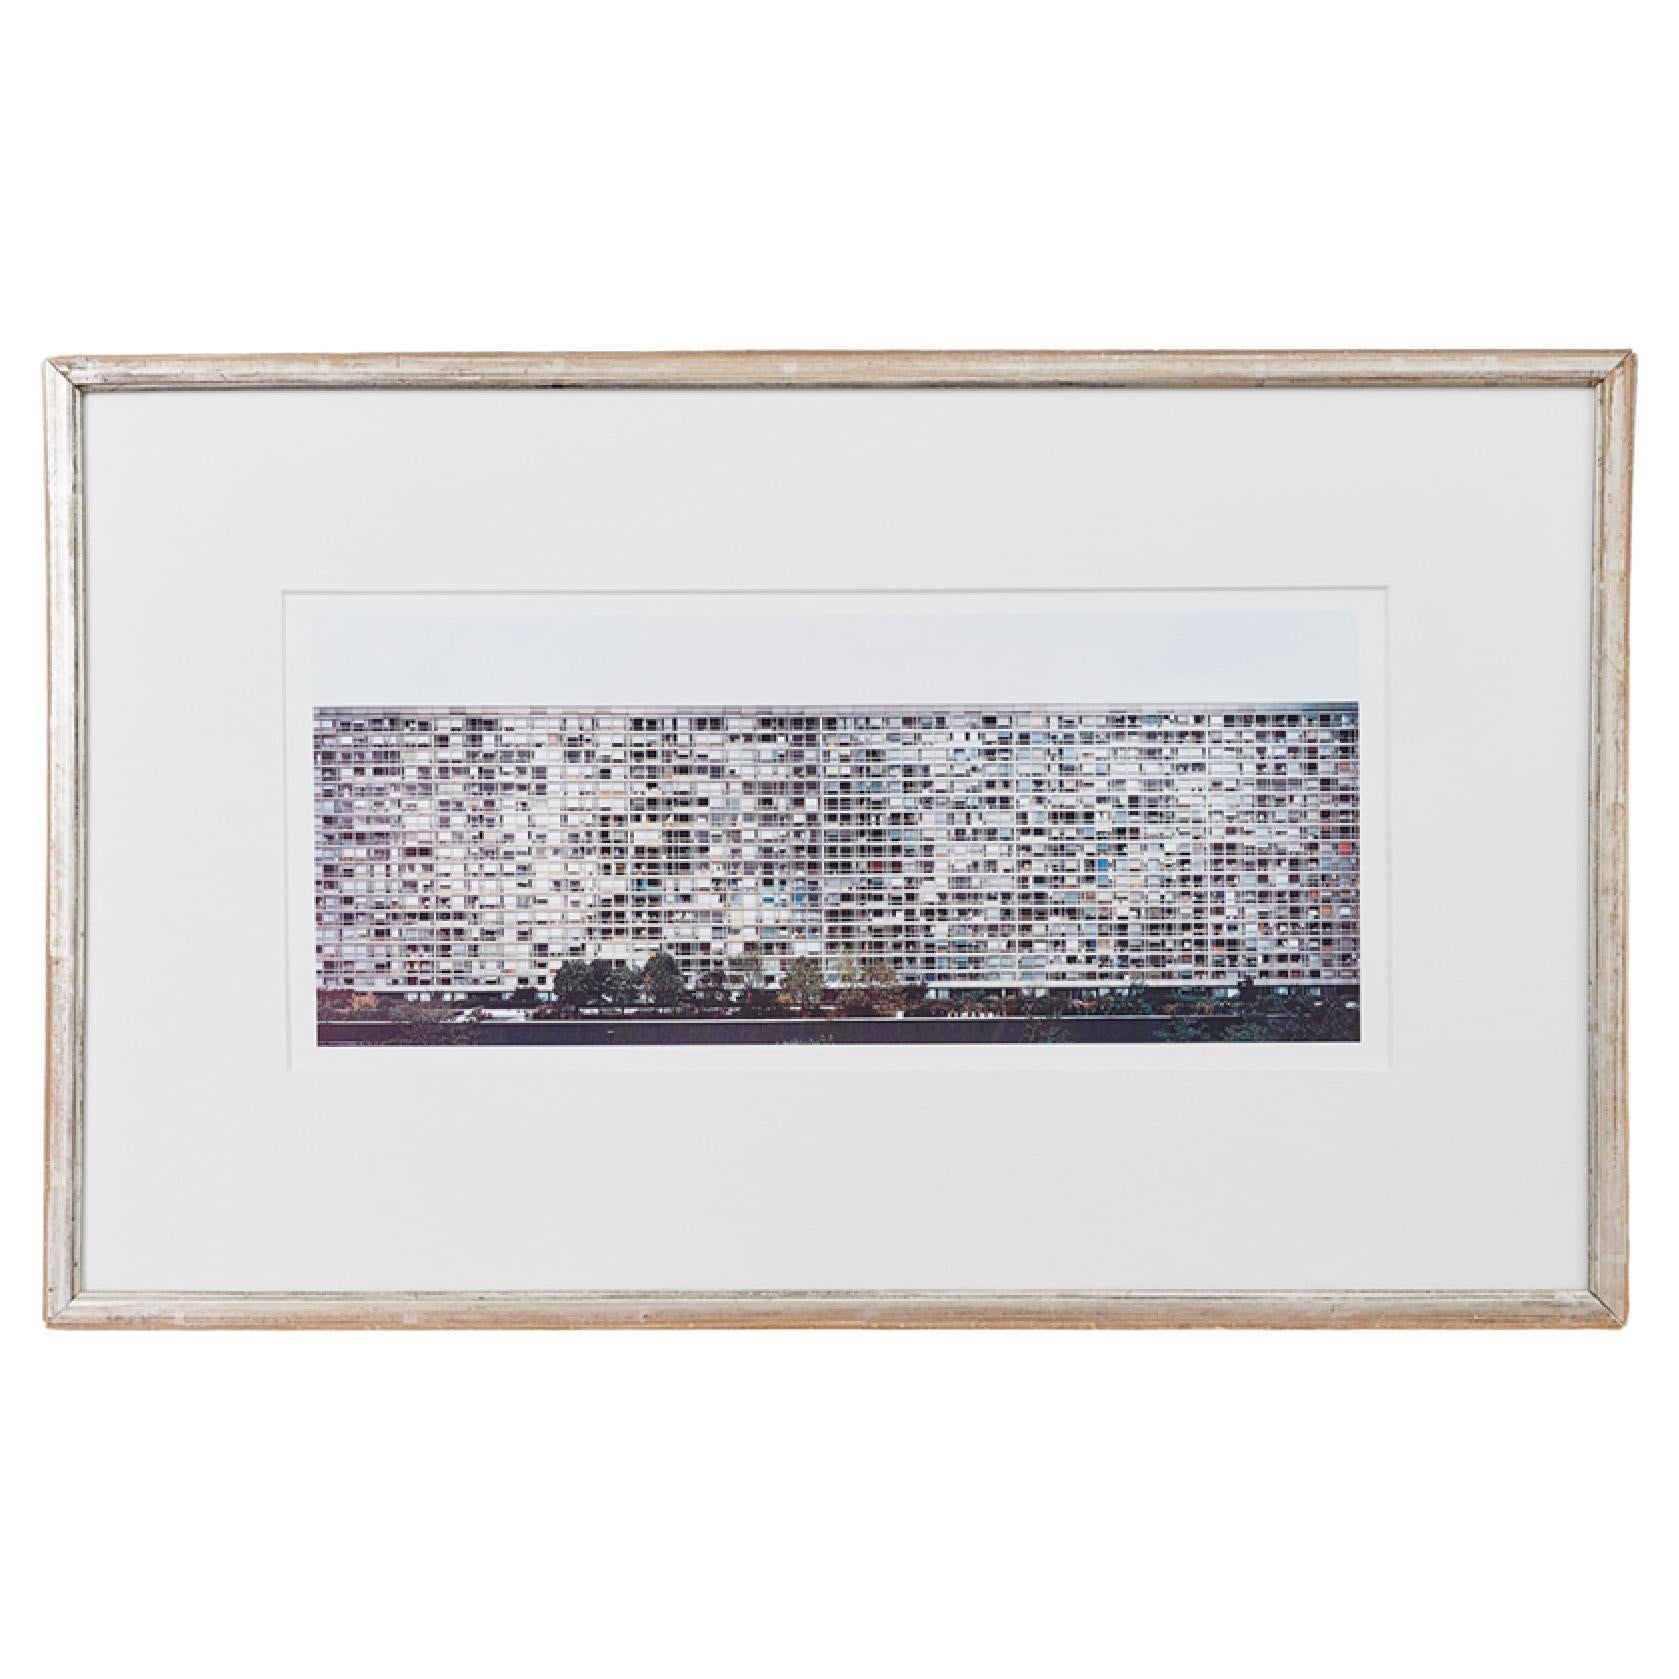 Vintage Andreas Gursky “Montparnasse” Lithograph, Signed, Germany, 1995 For Sale